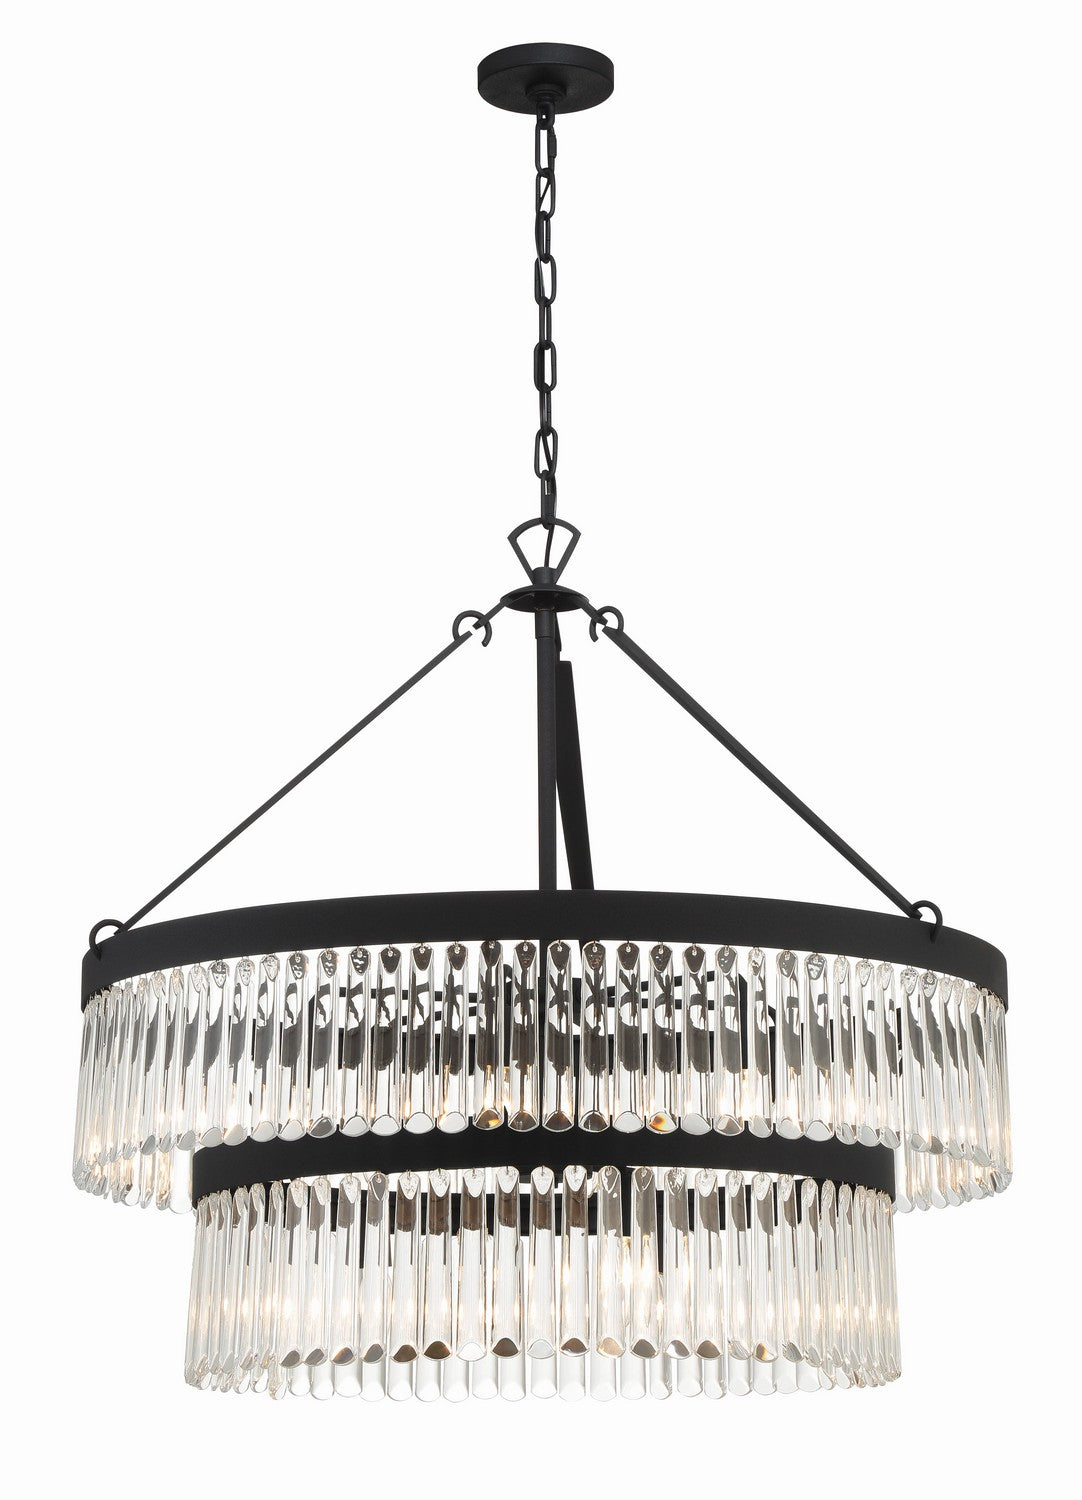 Emory 9-Light Chandelier in Black Forged by Crystorama - MPN EMO-5408-BF